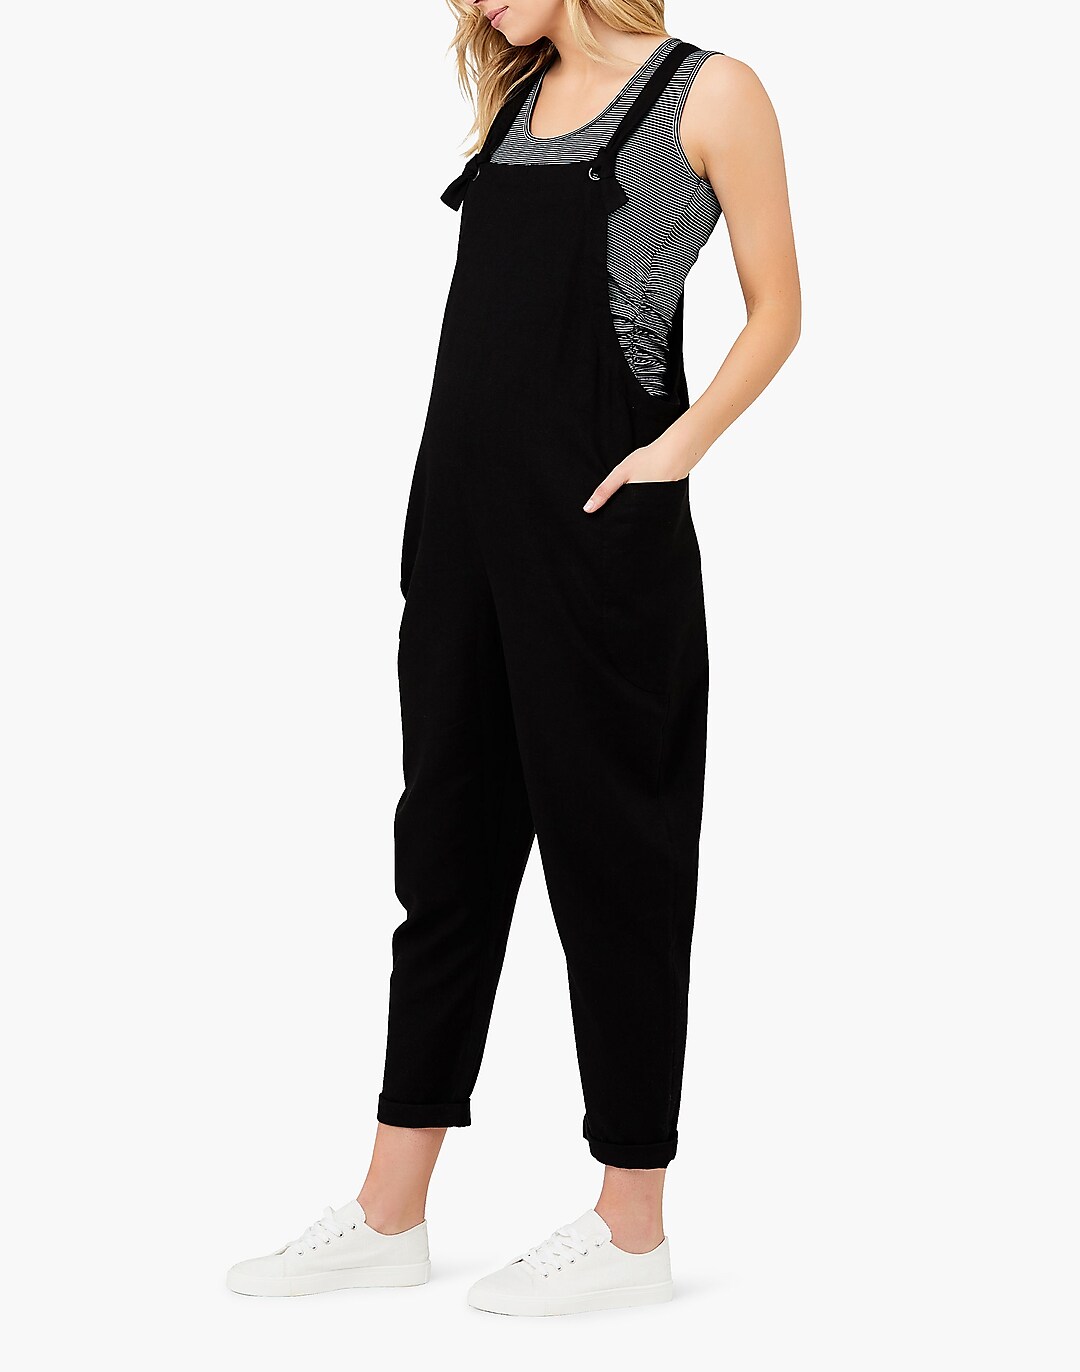 Breezy Gauze Maternity Romper in Black  Maternity Jumpsuits Canada – Carry  Maternity Canada